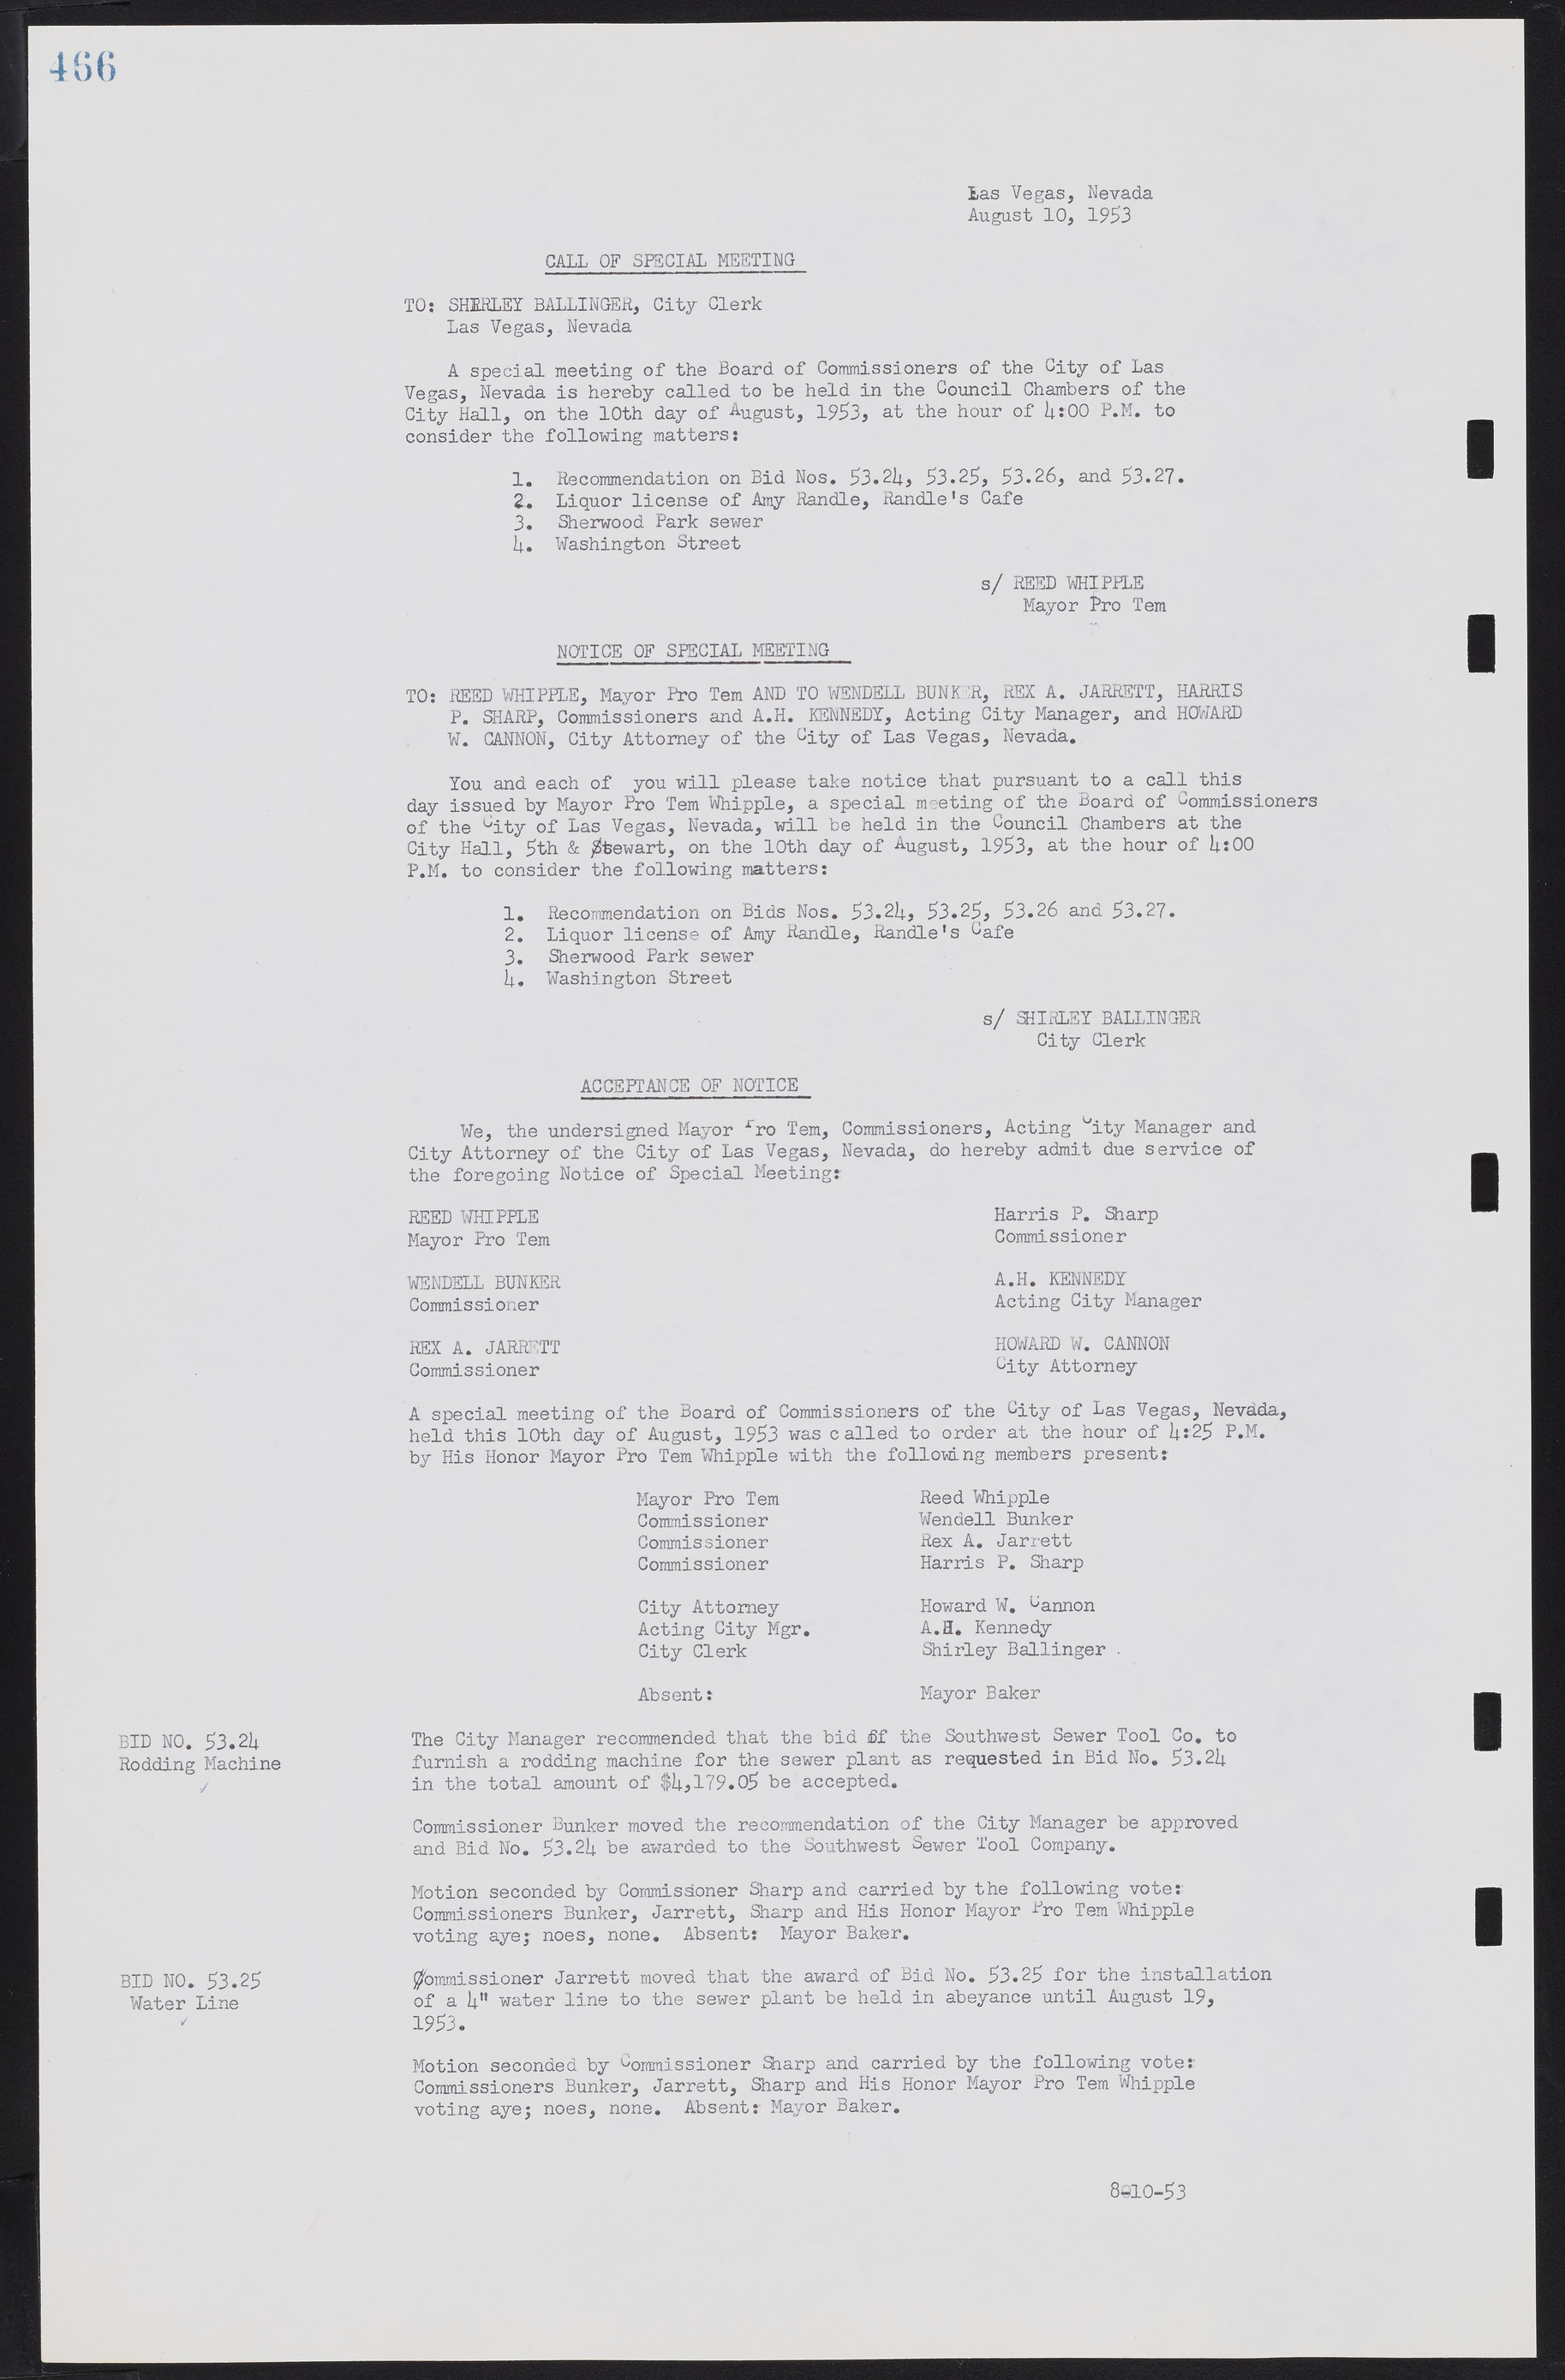 Las Vegas City Commission Minutes, May 26, 1952 to February 17, 1954, lvc000008-496